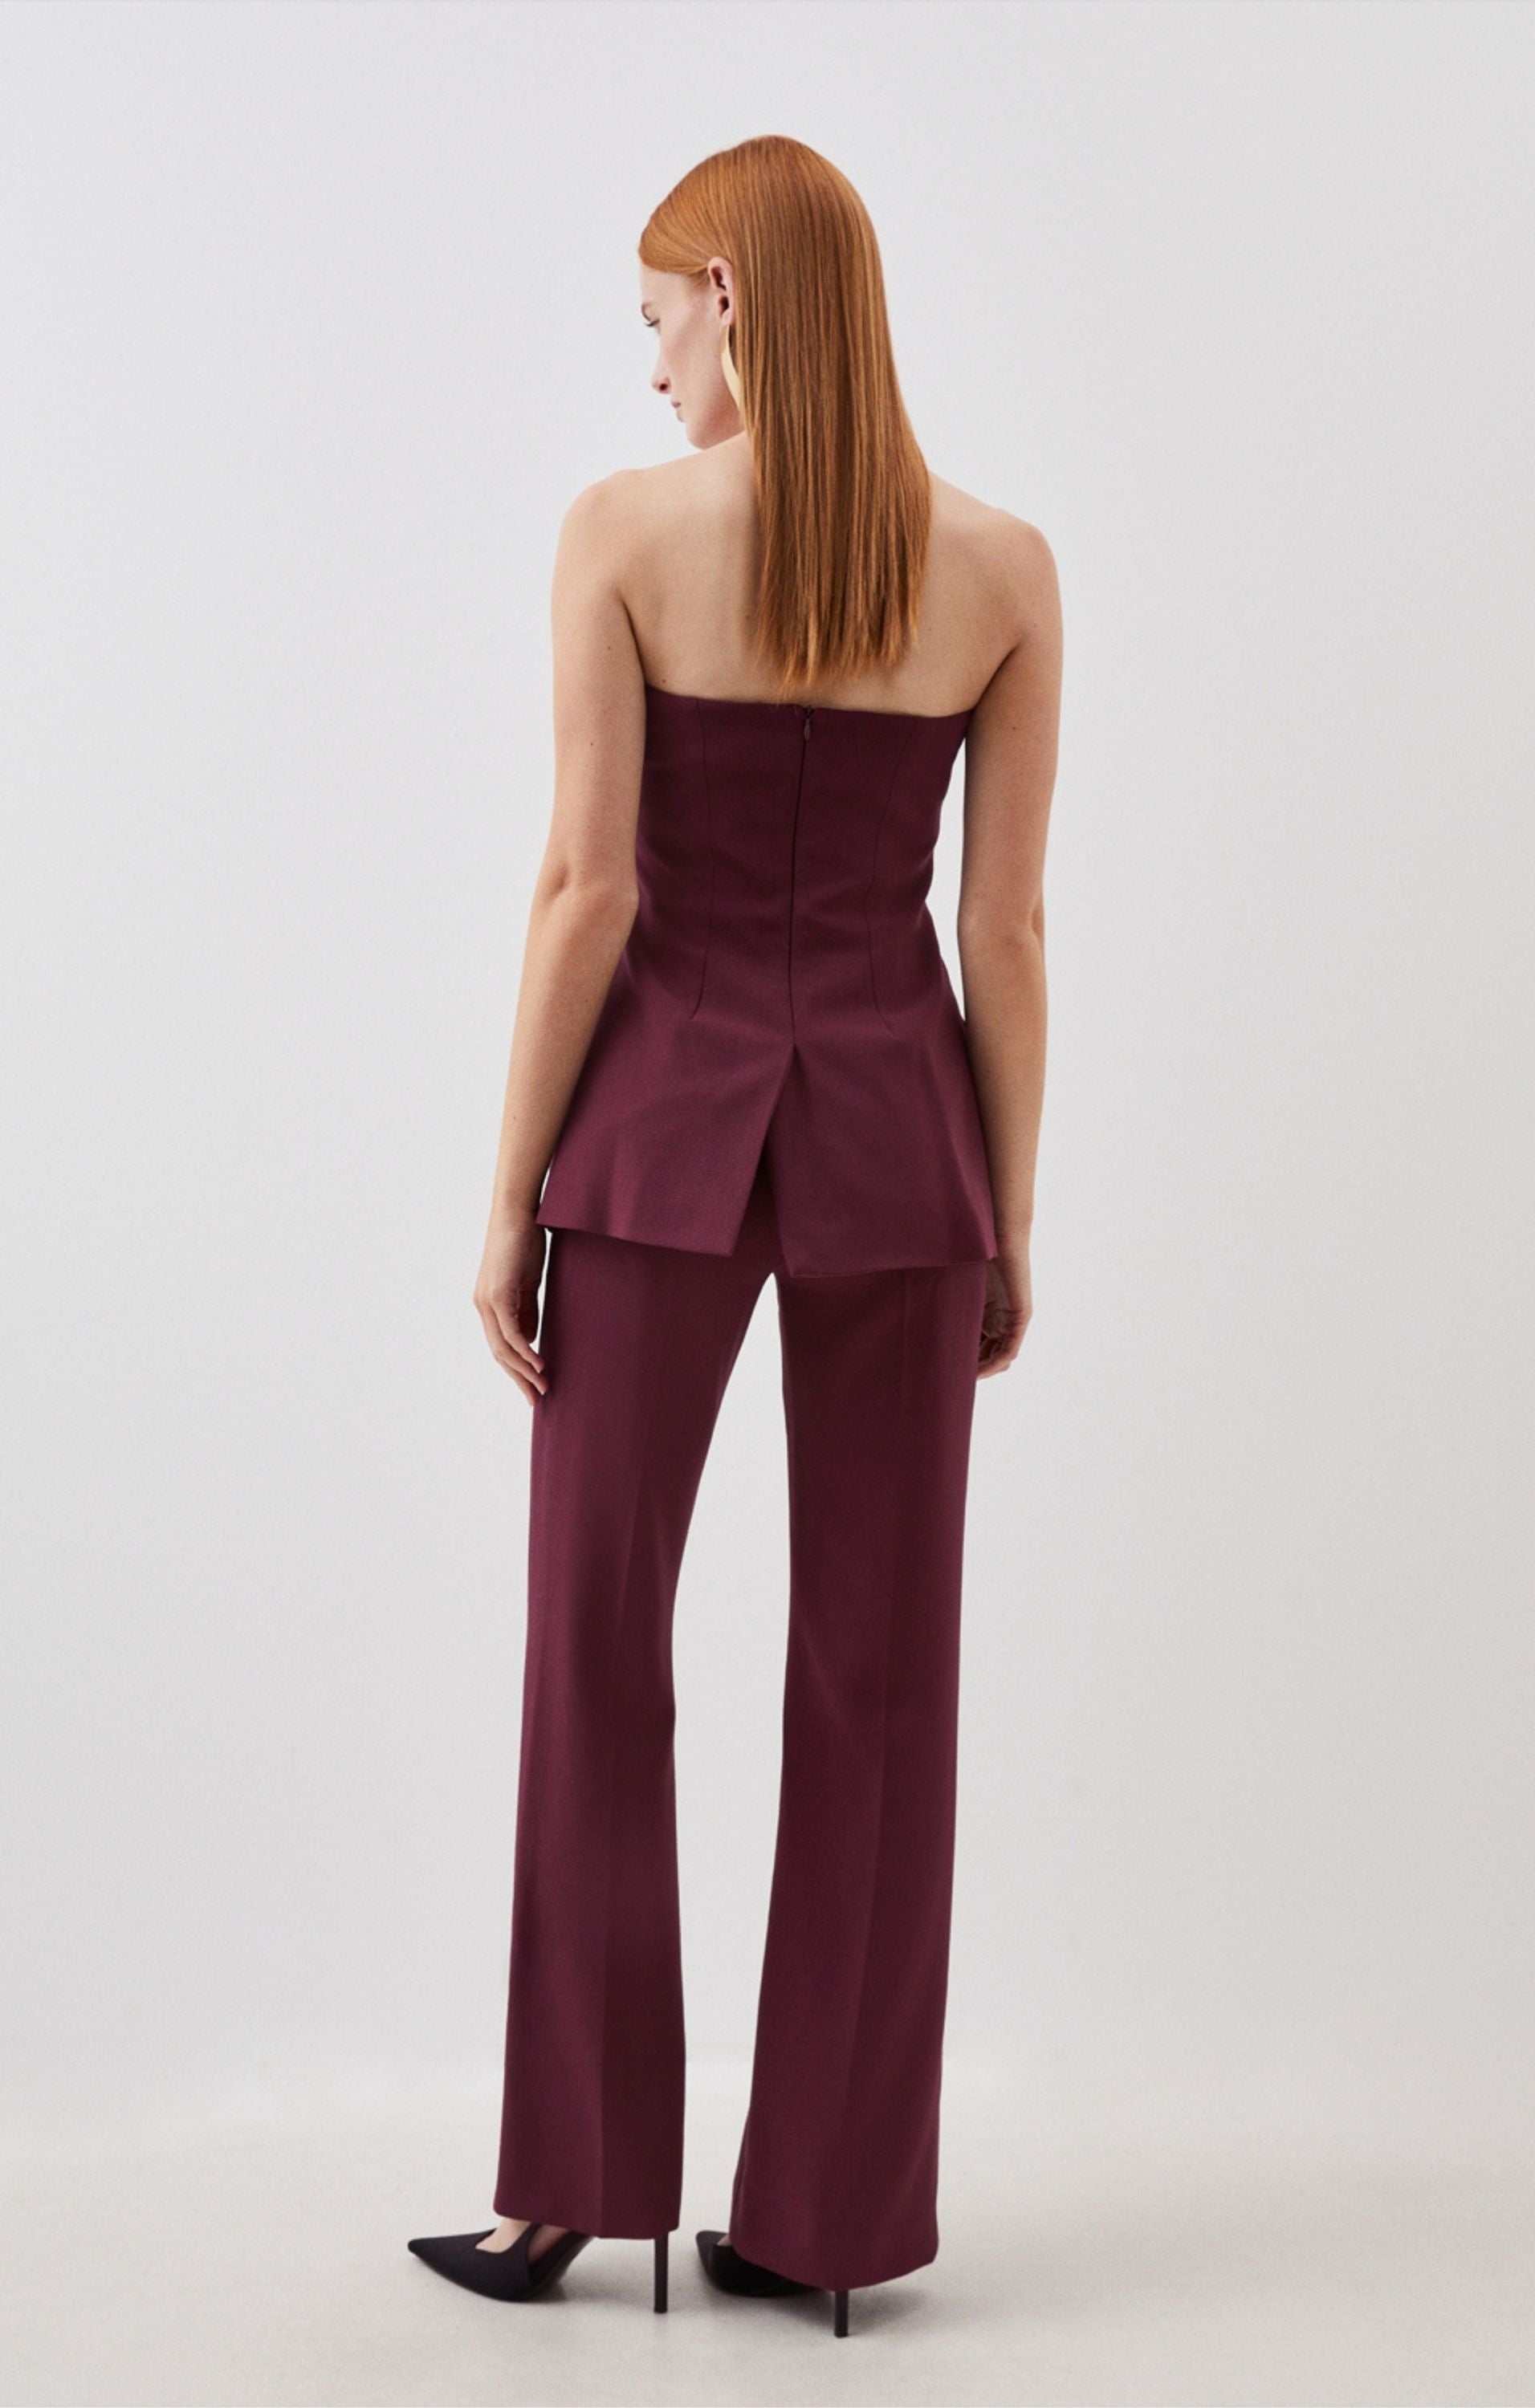 Karen Millen Compact Stretch Tailored Button Bodice Jumpsuit product image